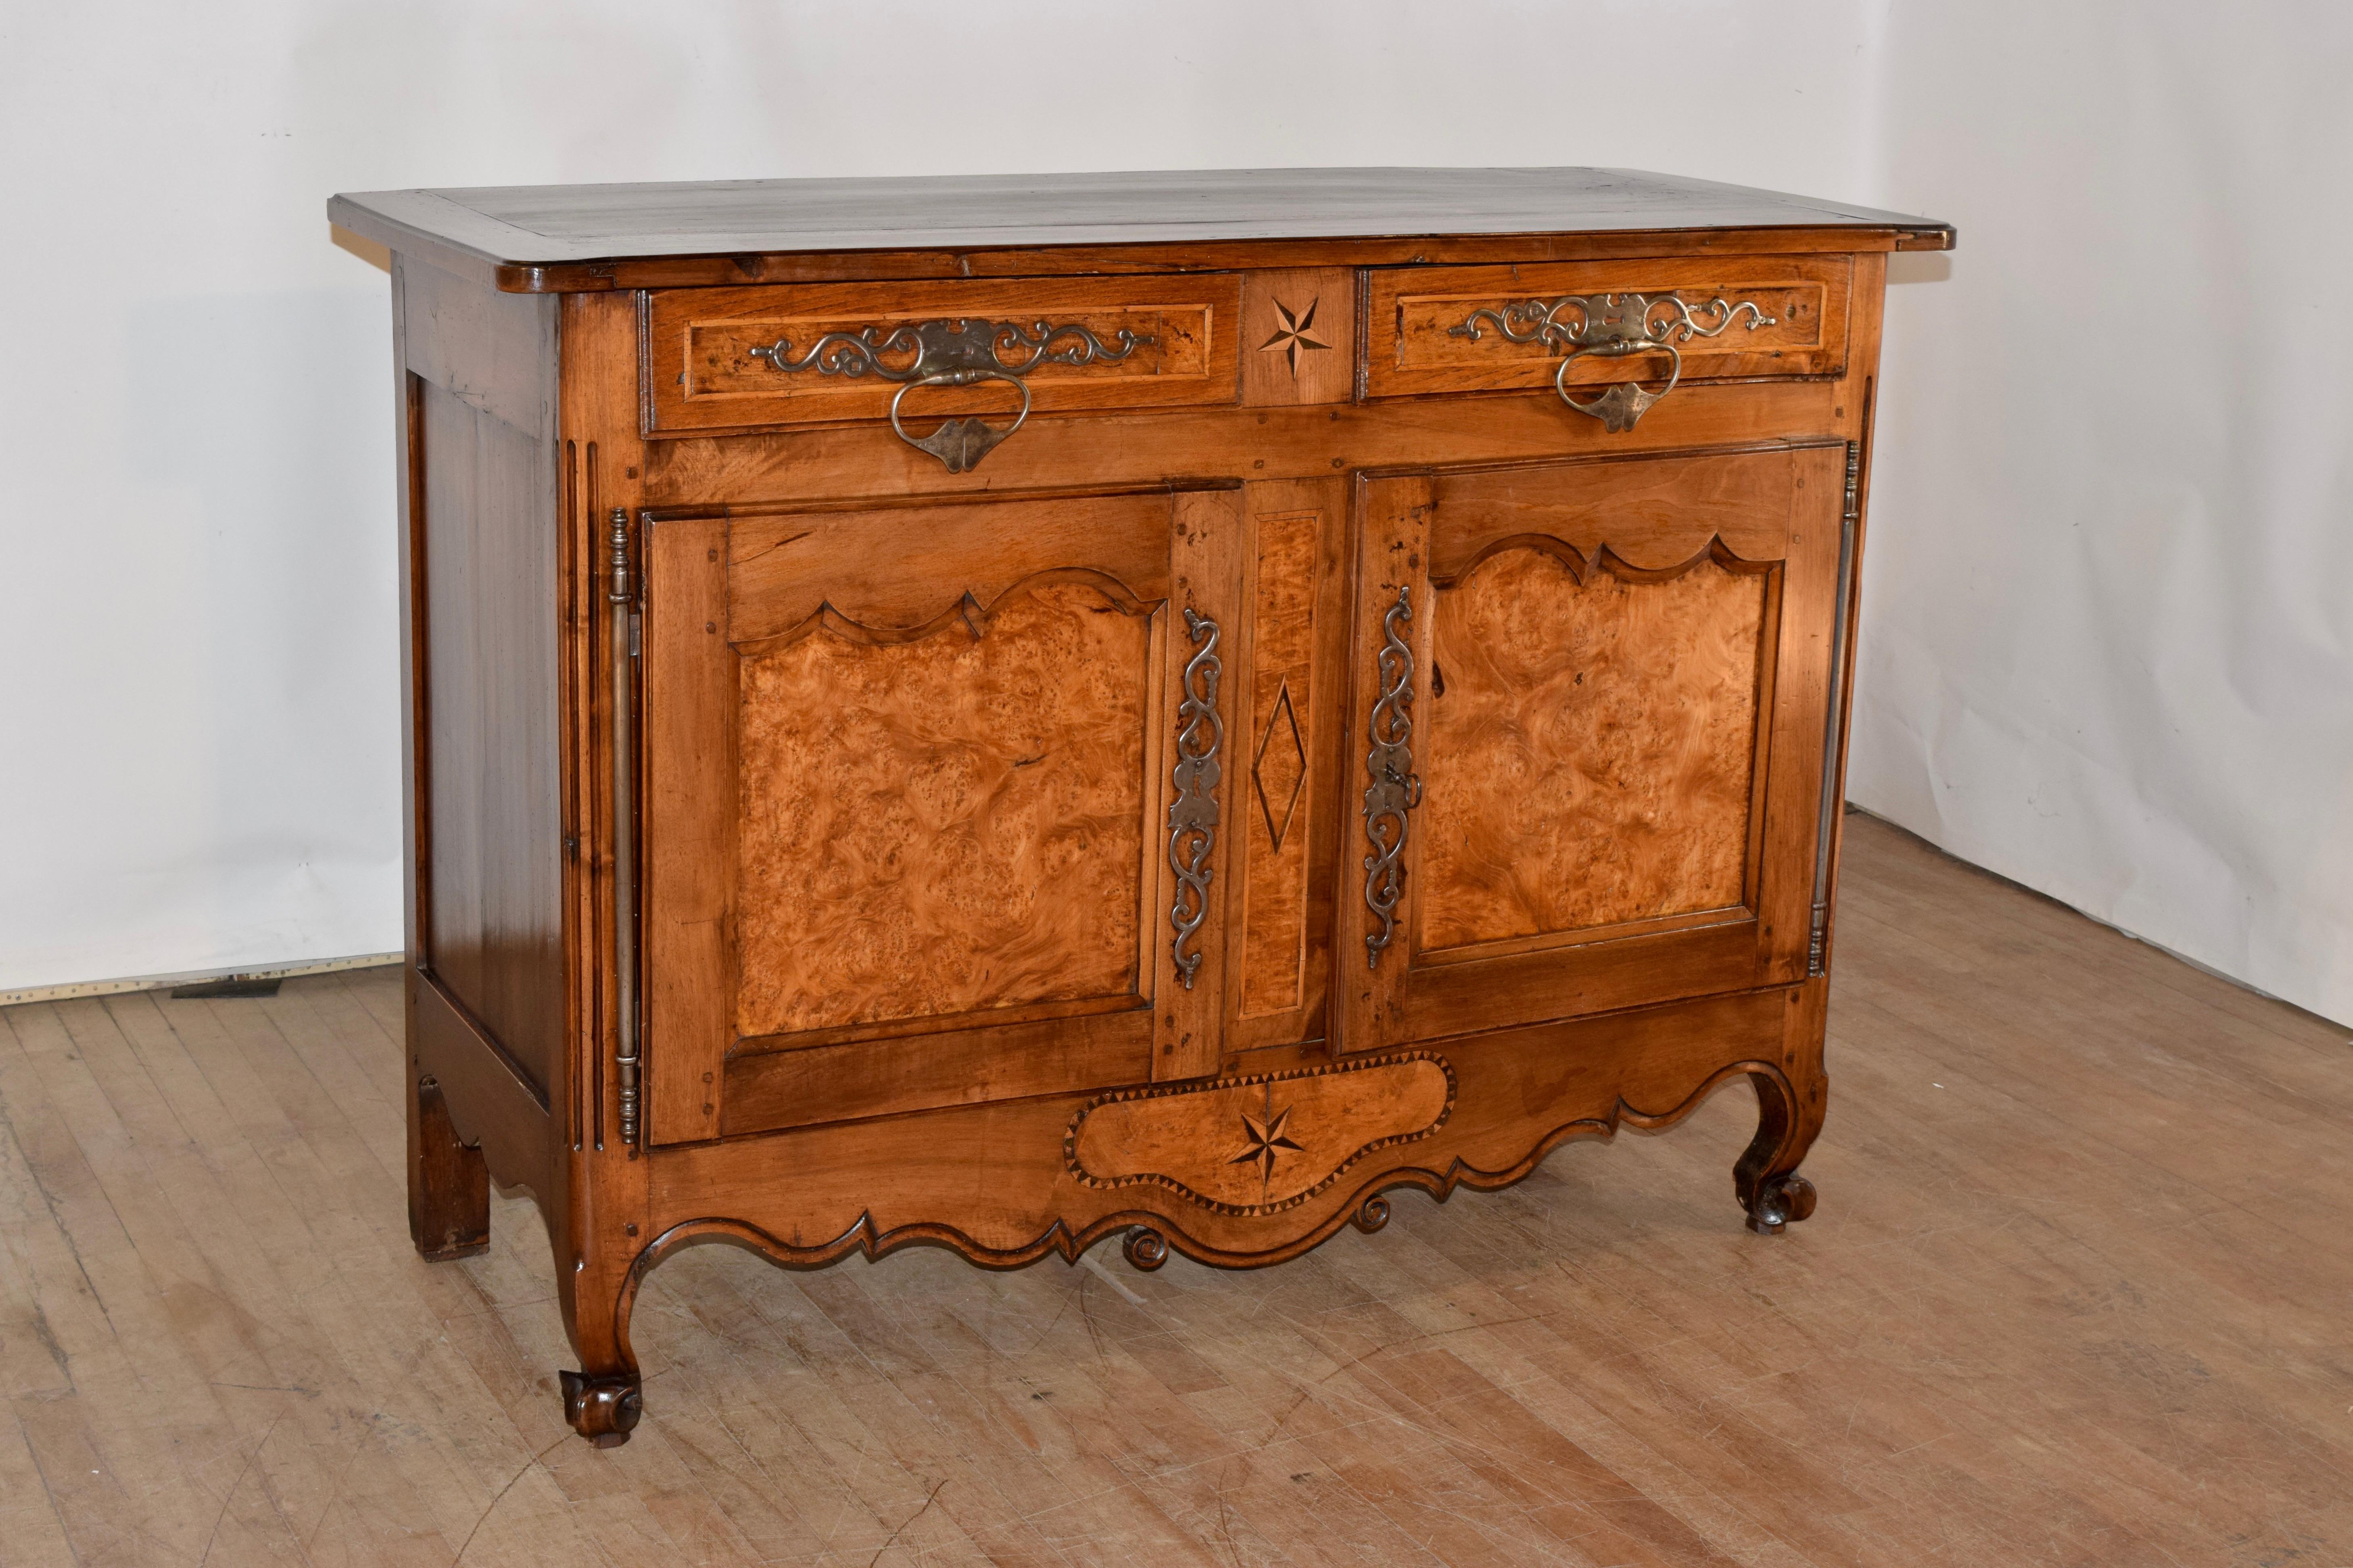 18th century walnut buffet from France with gorgeous burl walnut details throughout the piece. The top is banded and has a beveled edge, following down to hand paneled sides with scalloping on the skirt. There are two drawers, both banded in boxwood